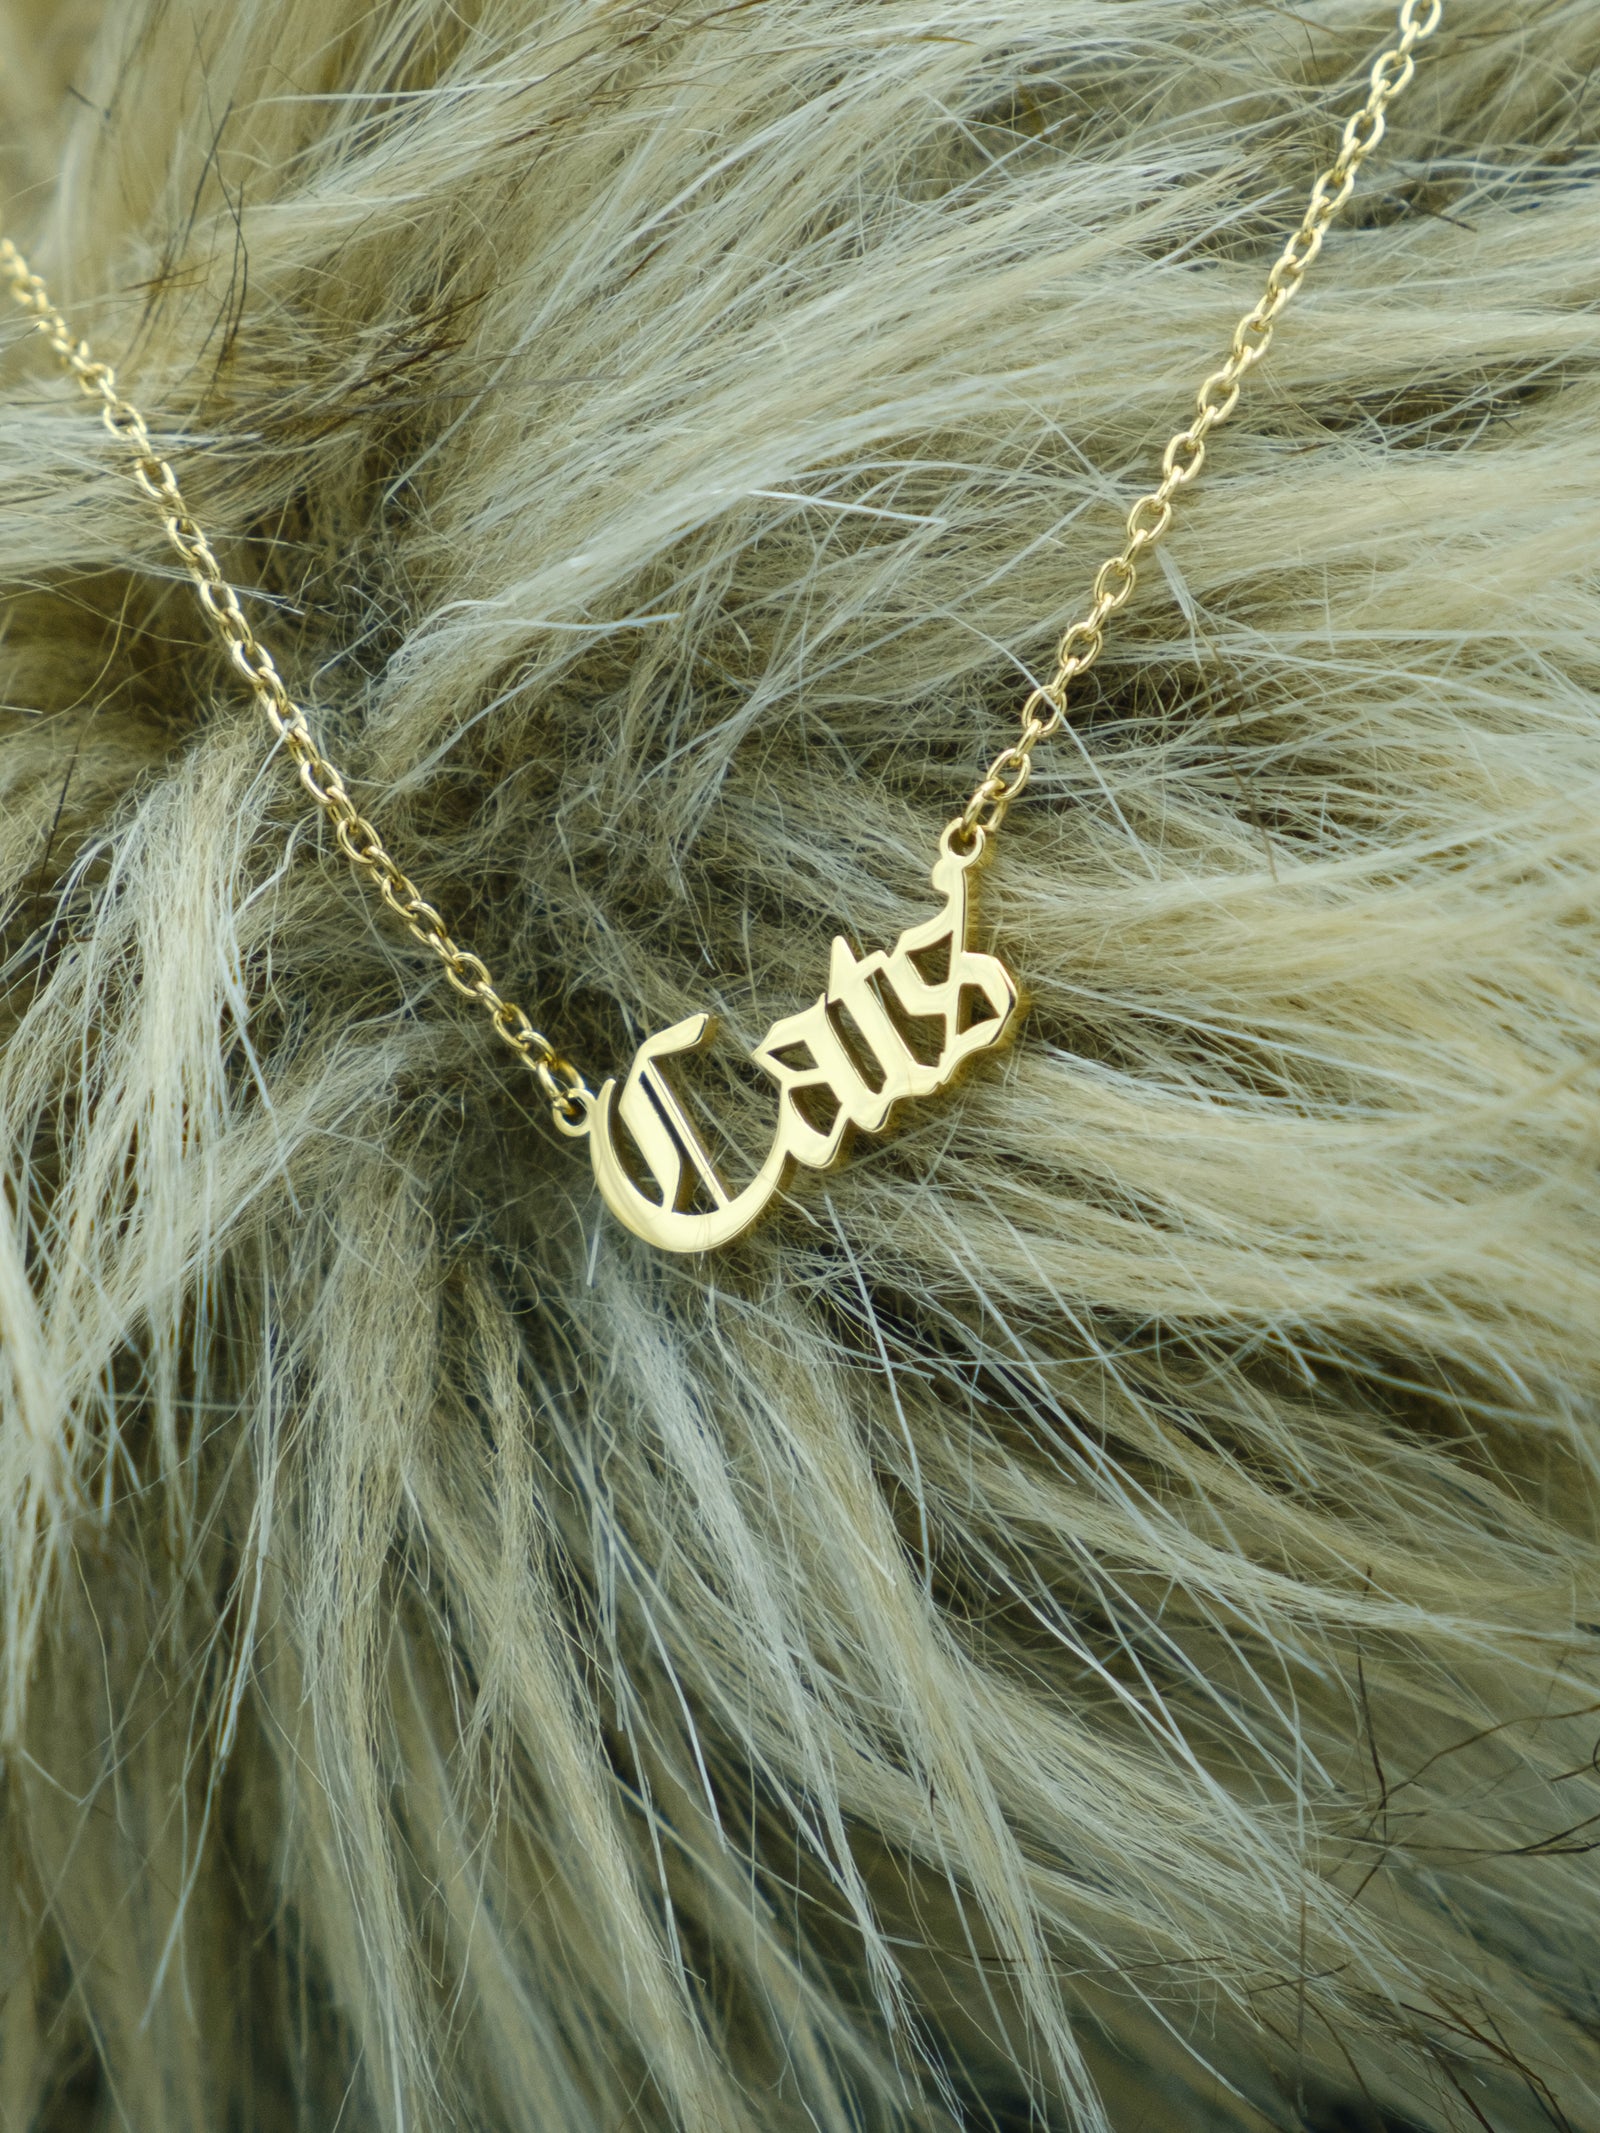 Cats word Necklace